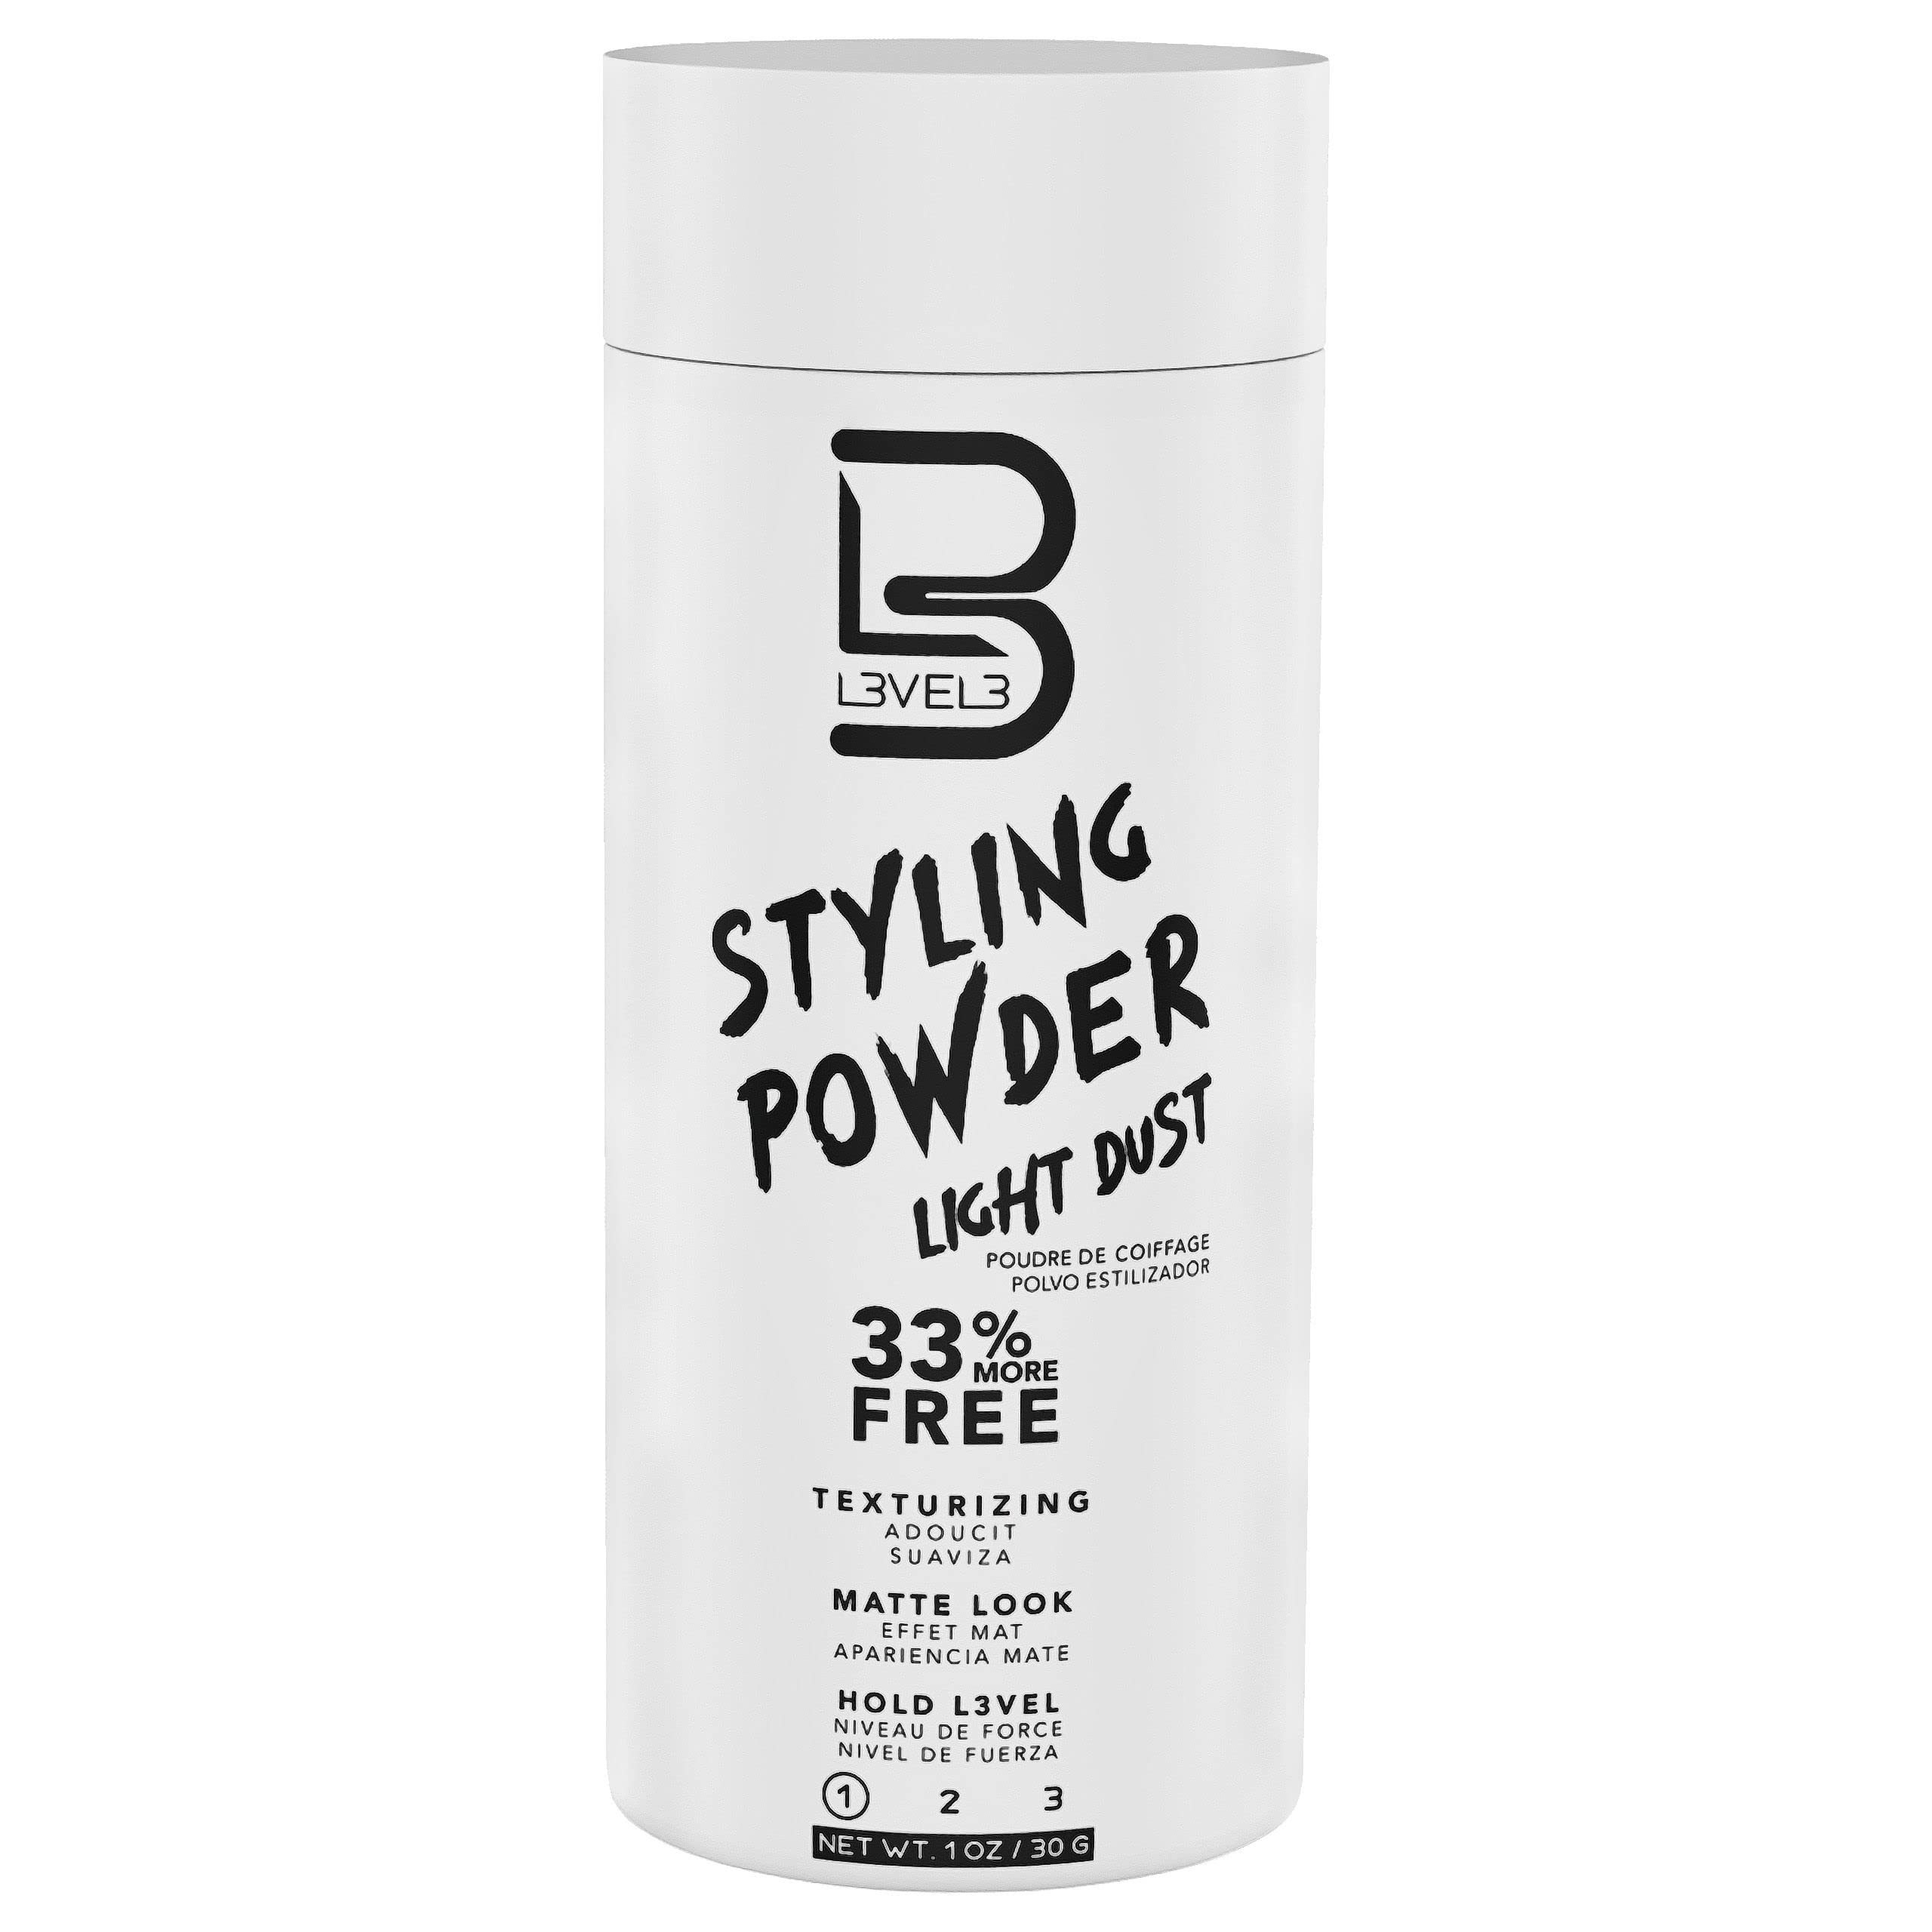 L3 Level 3 Styling Powder & Styling Comb Set - Easy to Apply with No Oil or  Greasy Residue - Professional Salon Look - Lightweight and Ergonomic 